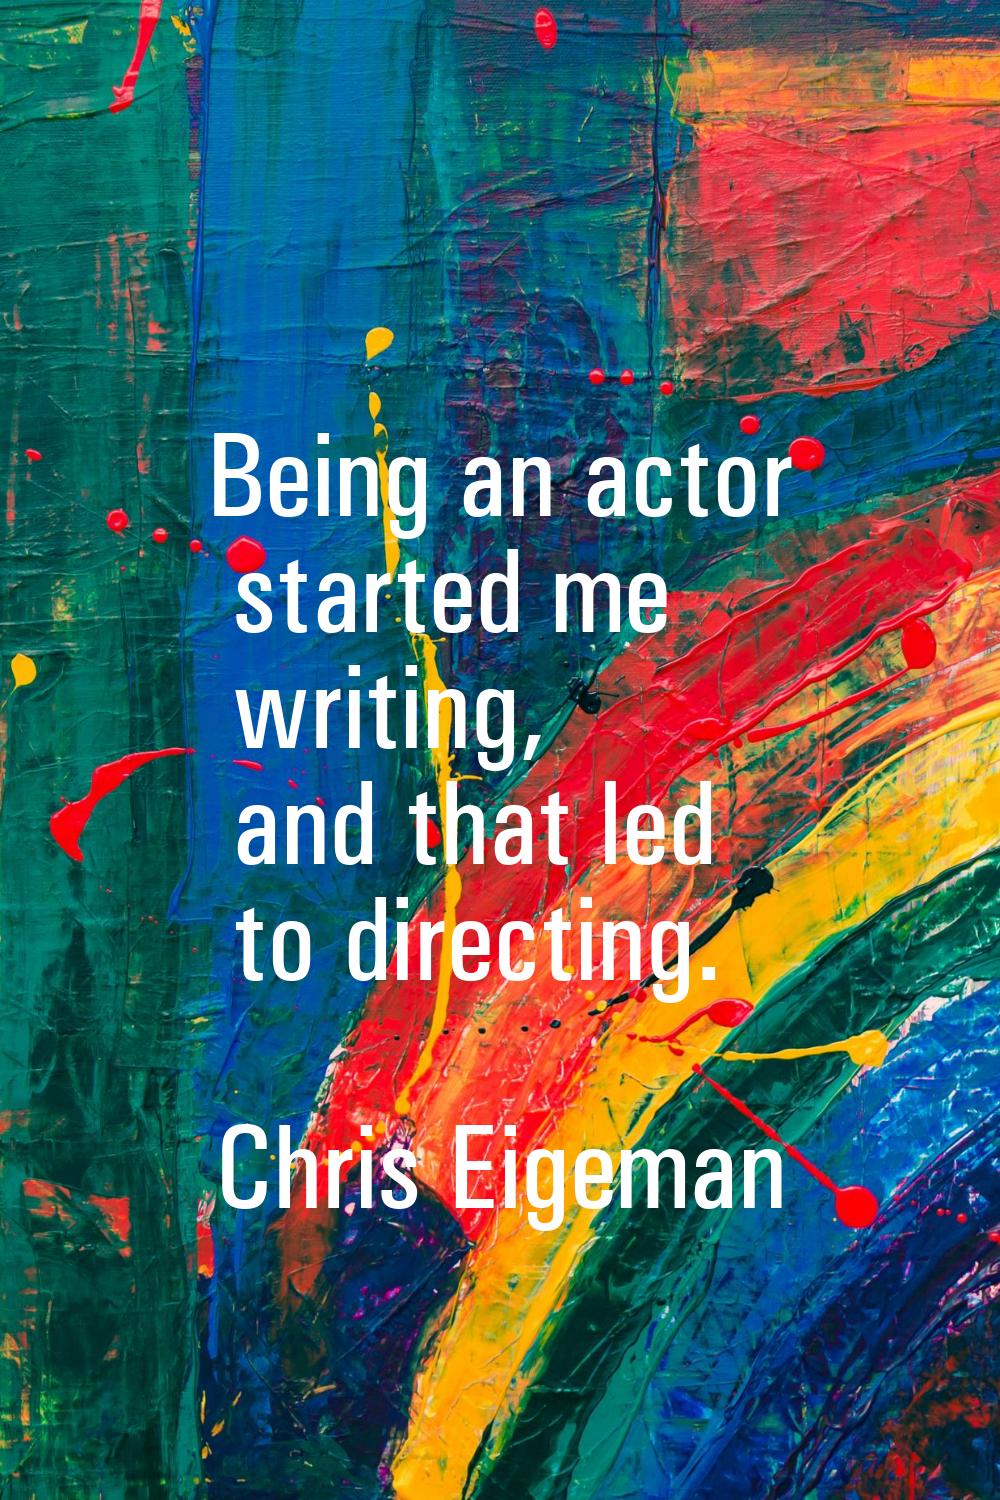 Being an actor started me writing, and that led to directing.